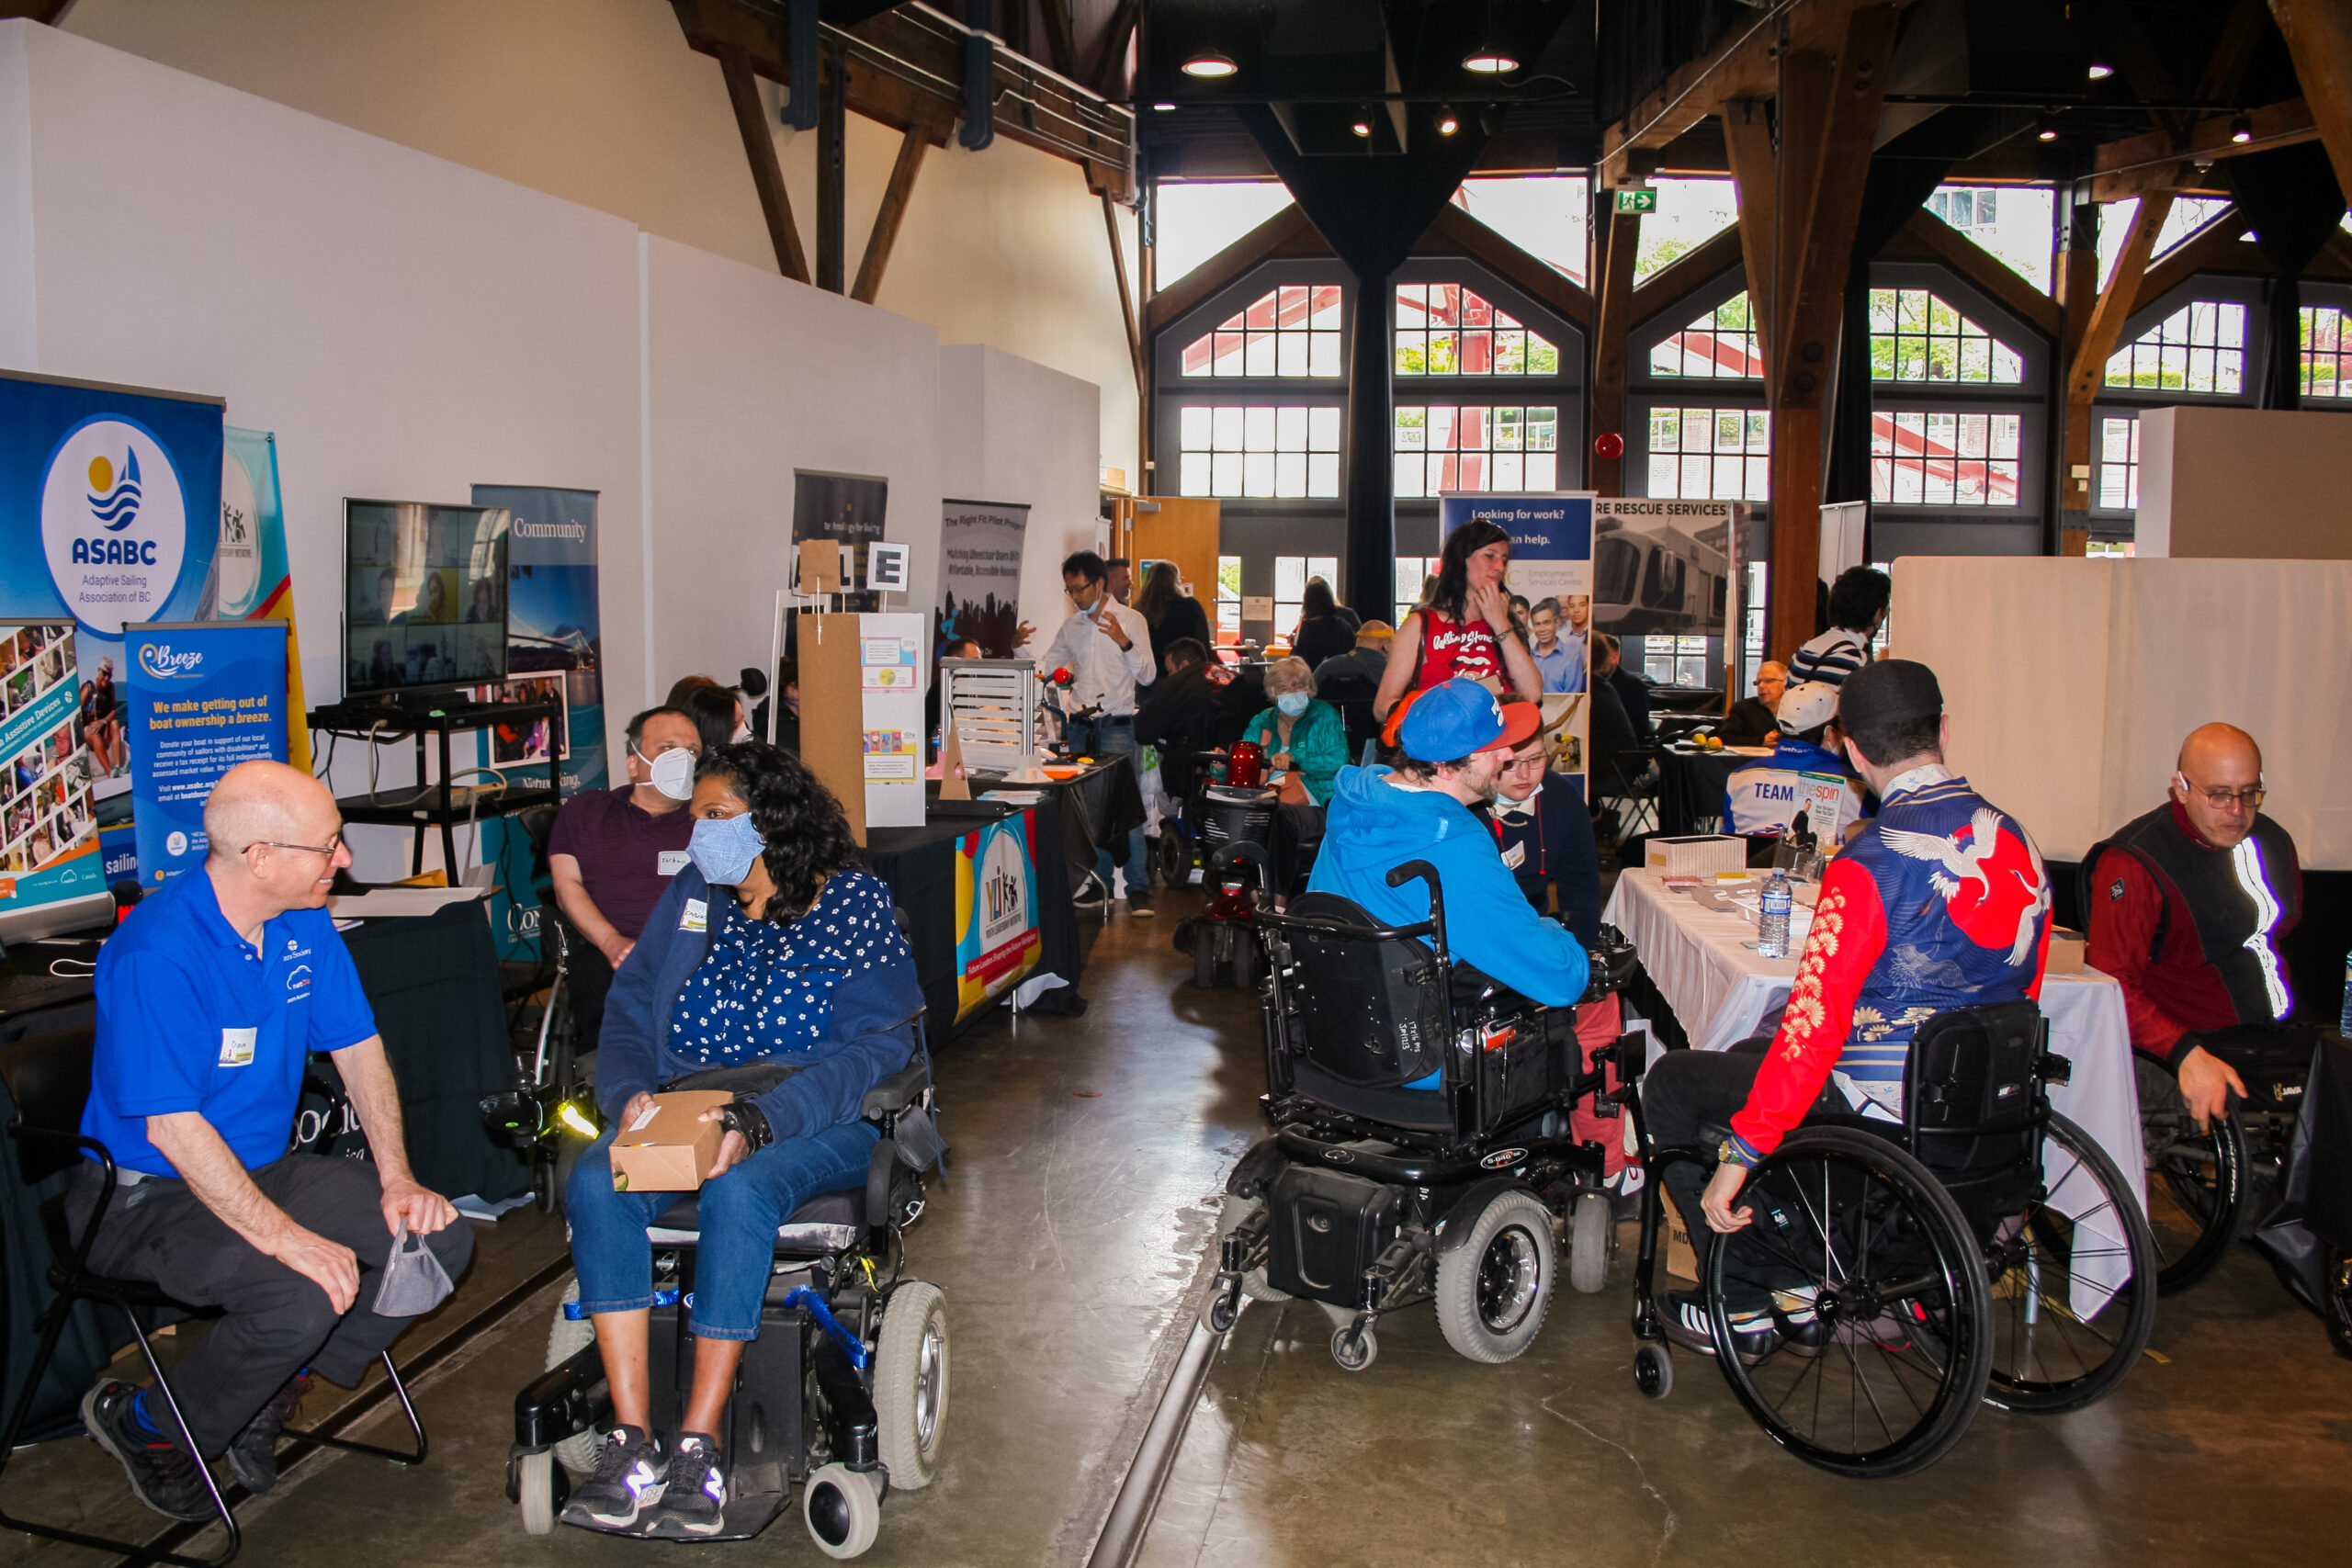 people in wheelchairs approaching vendors and the people stationed at them at the Abilities Expo 2022. Everyone appears to be genuinely connecting, with big smiles on their faces.